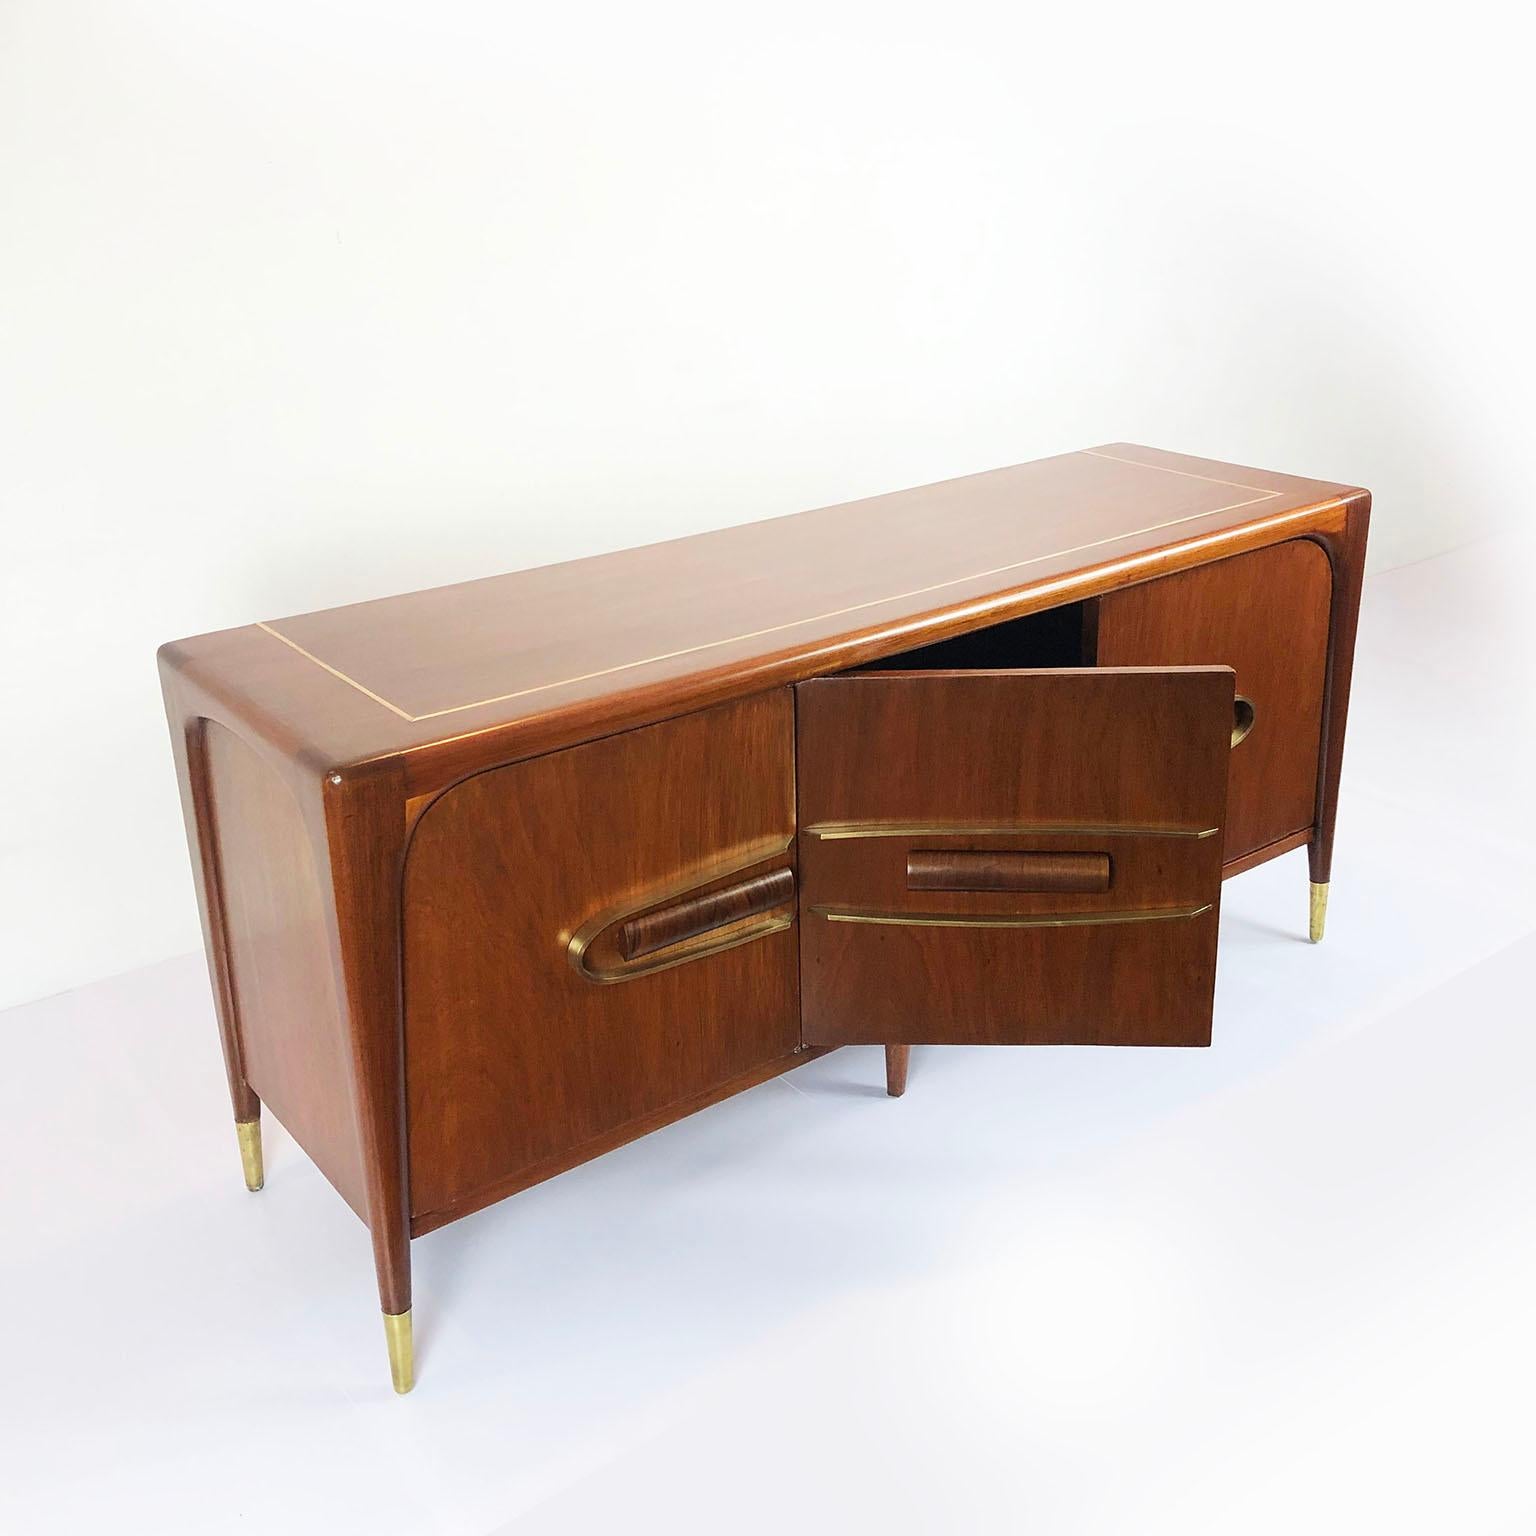 We offer a Mexican modernist long credenza in solid mahogany wood frame, with brass accents and solid mahogany pull handles, circa 1960. Recently restored.